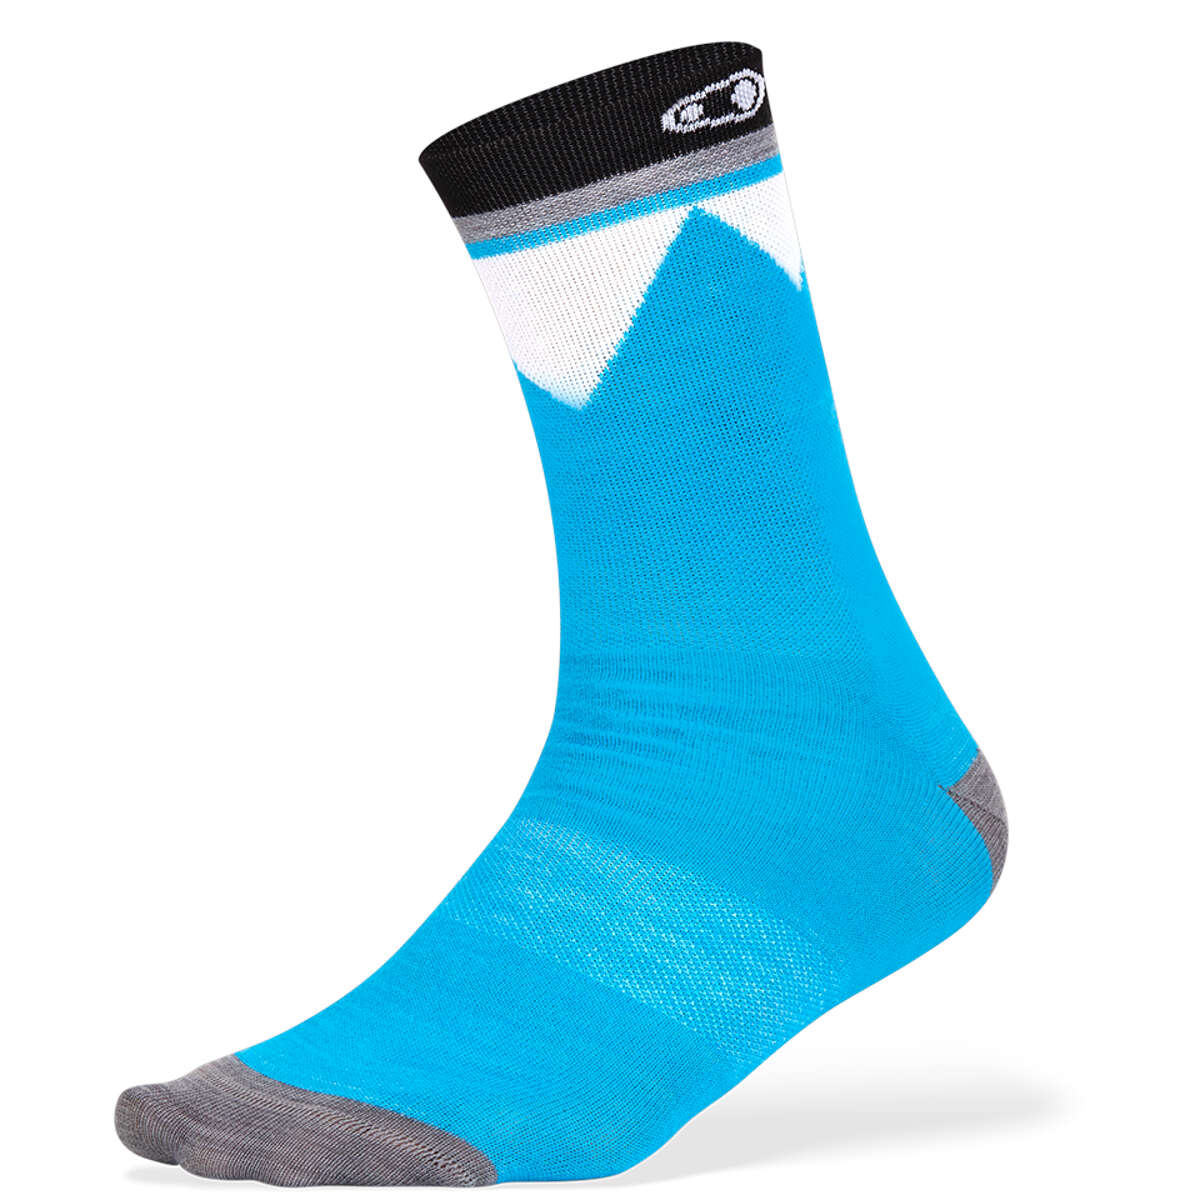 Crankbrothers Chaussettes Mountain Blue/Grey/Black